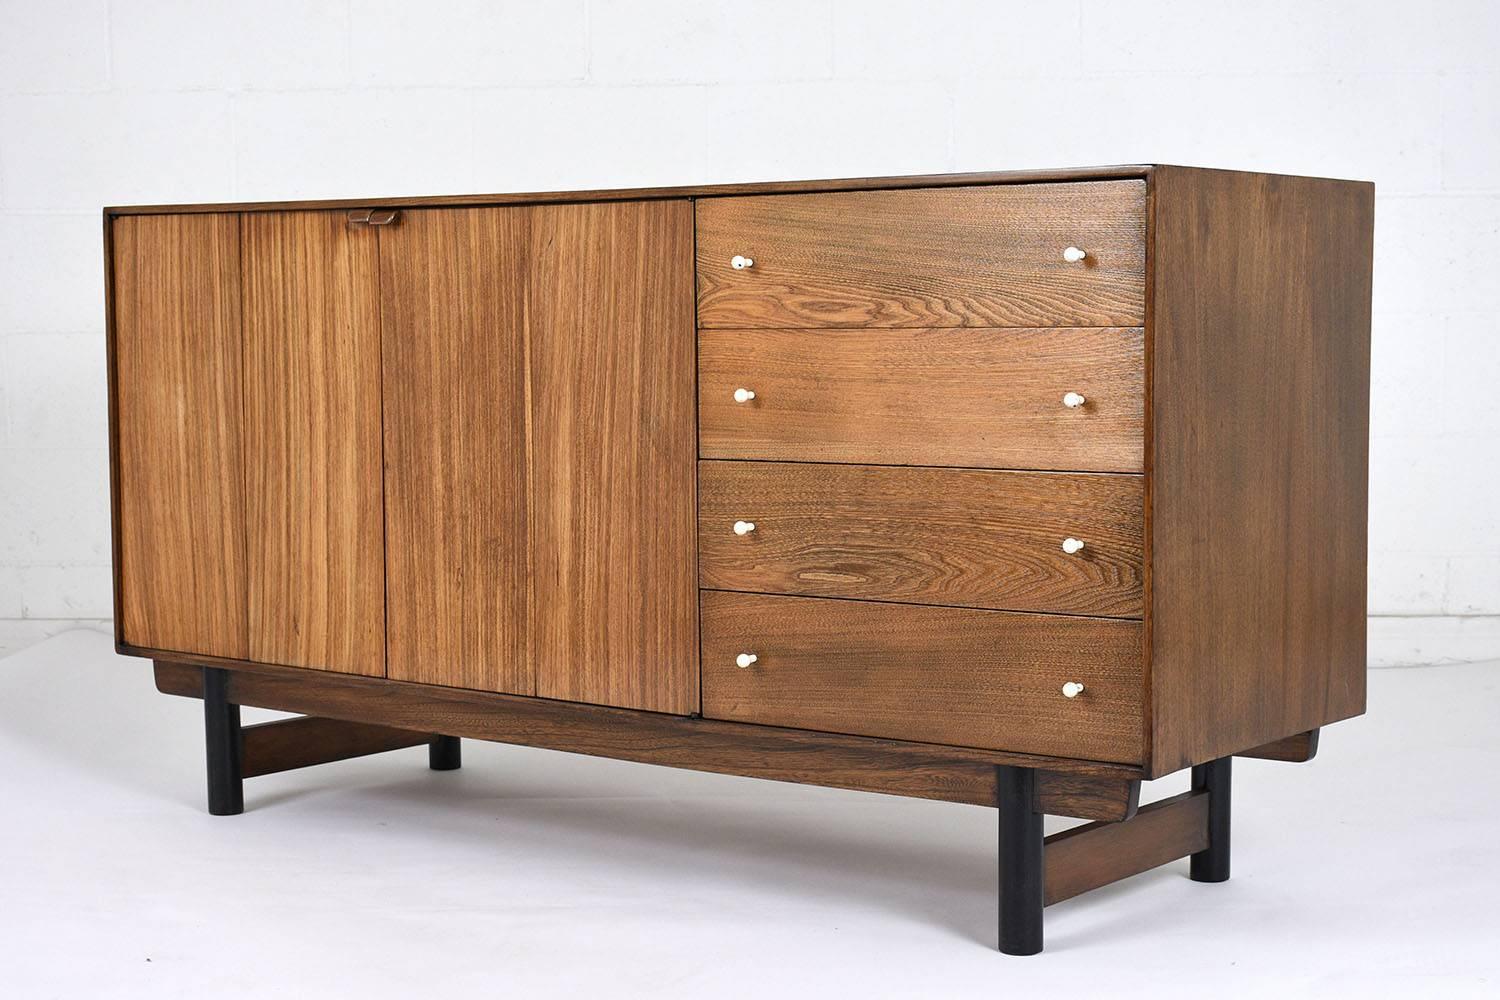 This 1960s Mid-Century Modern Credenza is made of walnut wood stained a walnut color with a polished finish and has been fully restored. This buffet features four drawers with white rubber coated drawer pulls, two accordion cabinet doors that close